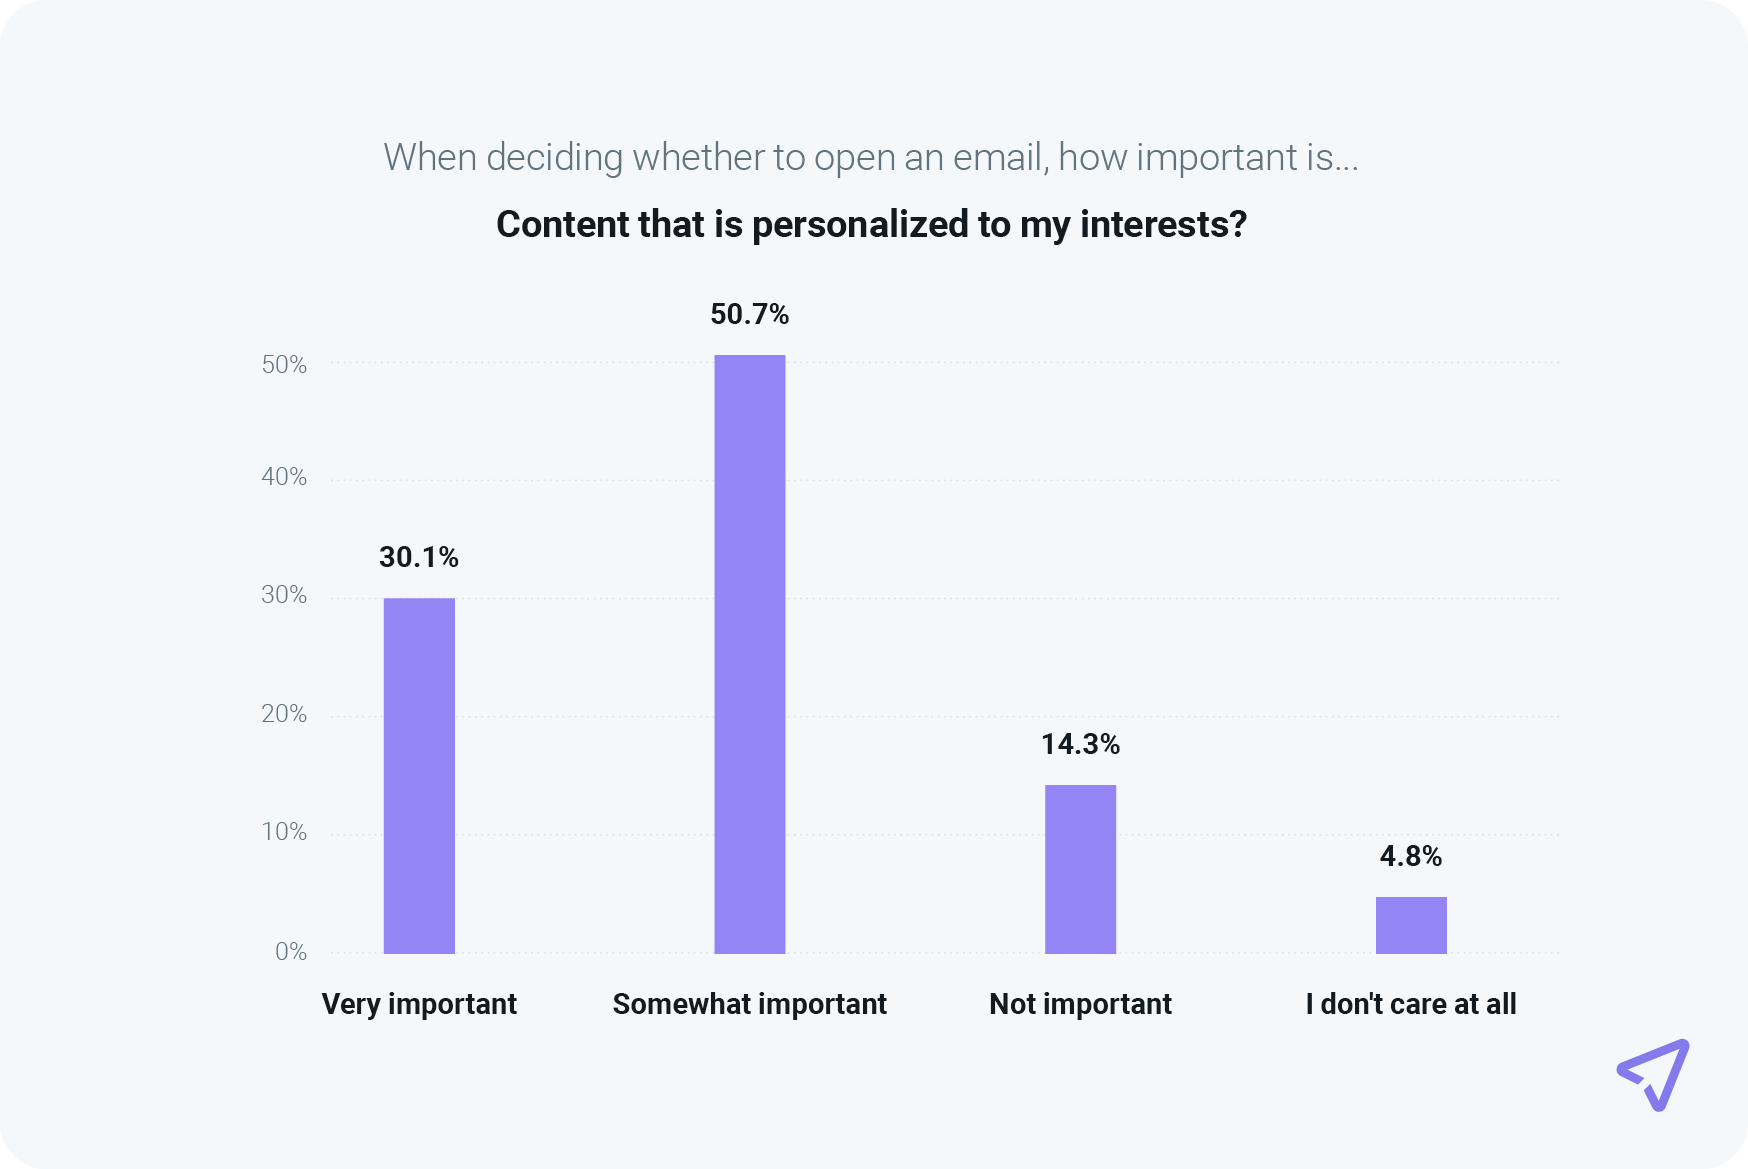 Chart shows 80.8% of consumers say personalized email content is important